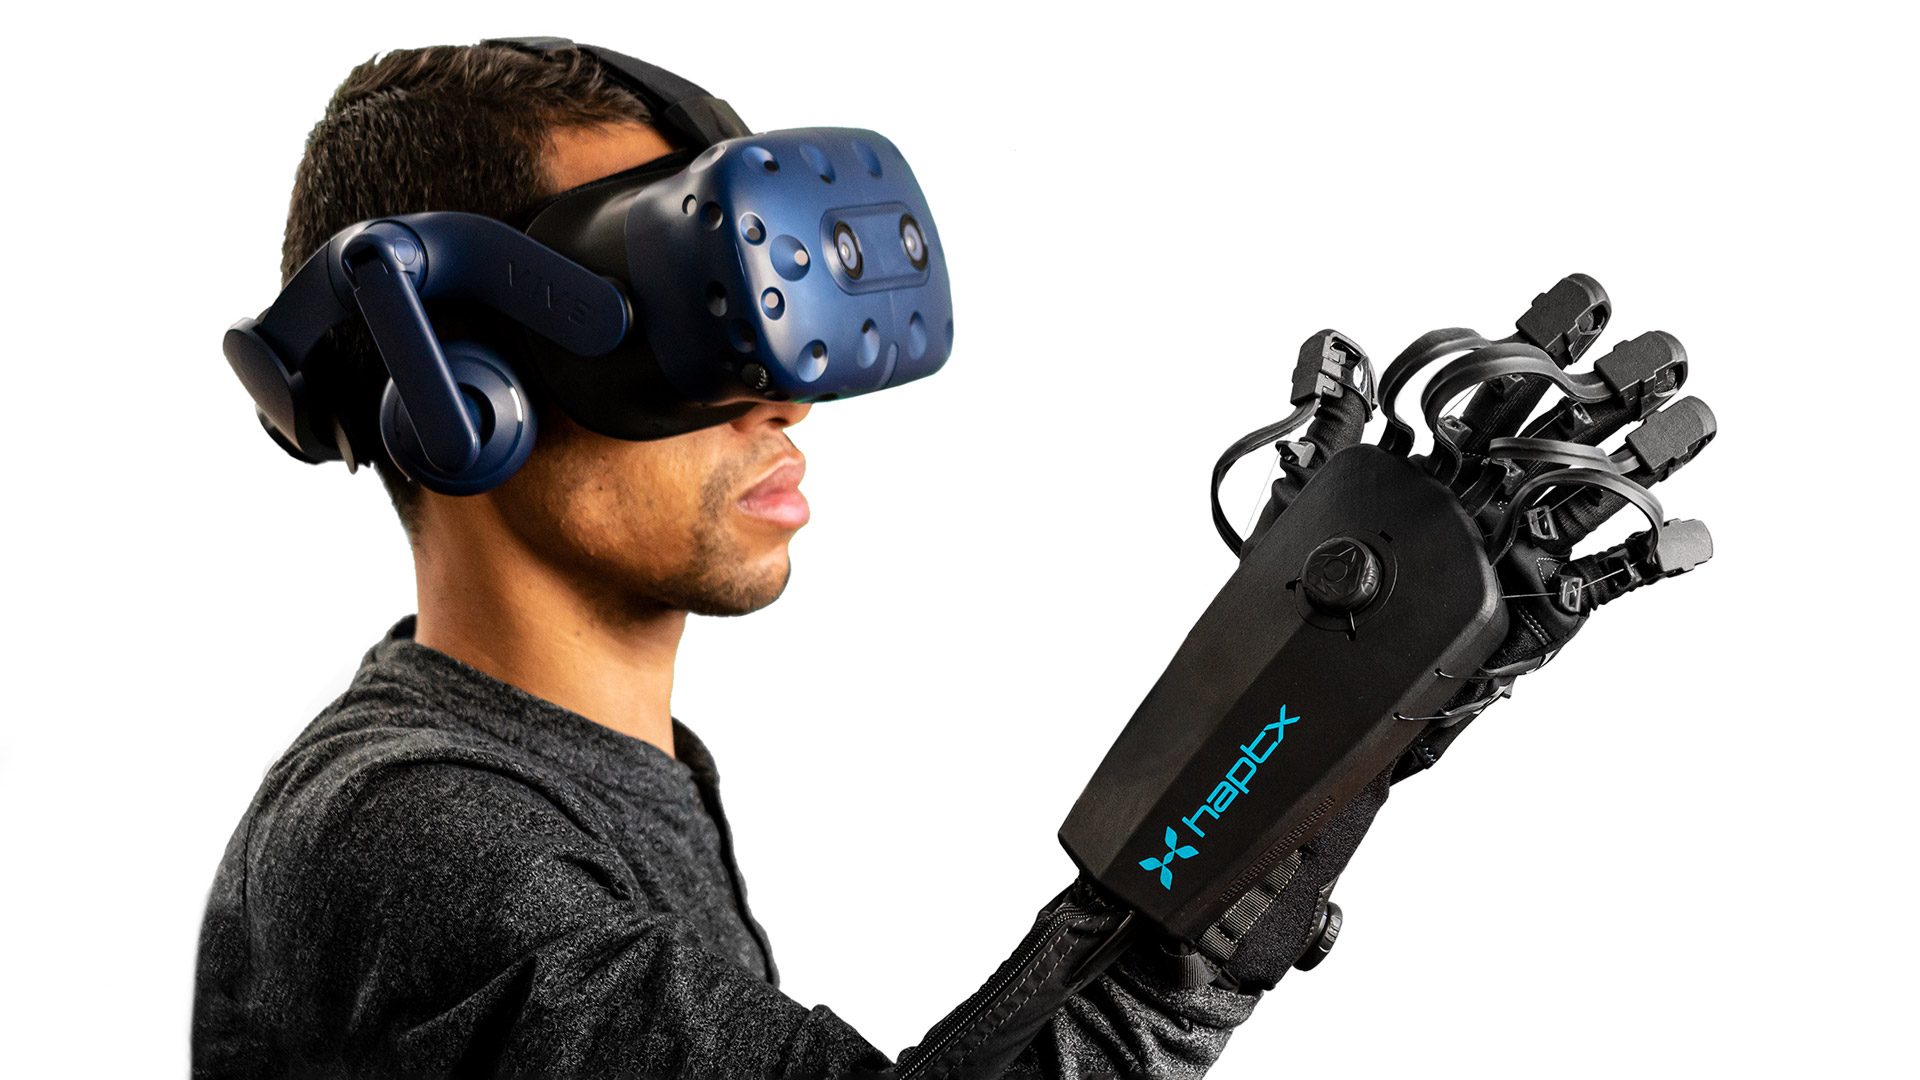 Haptx Launches New And Improved Dk2 Haptic Vr Gloves For Enterprise